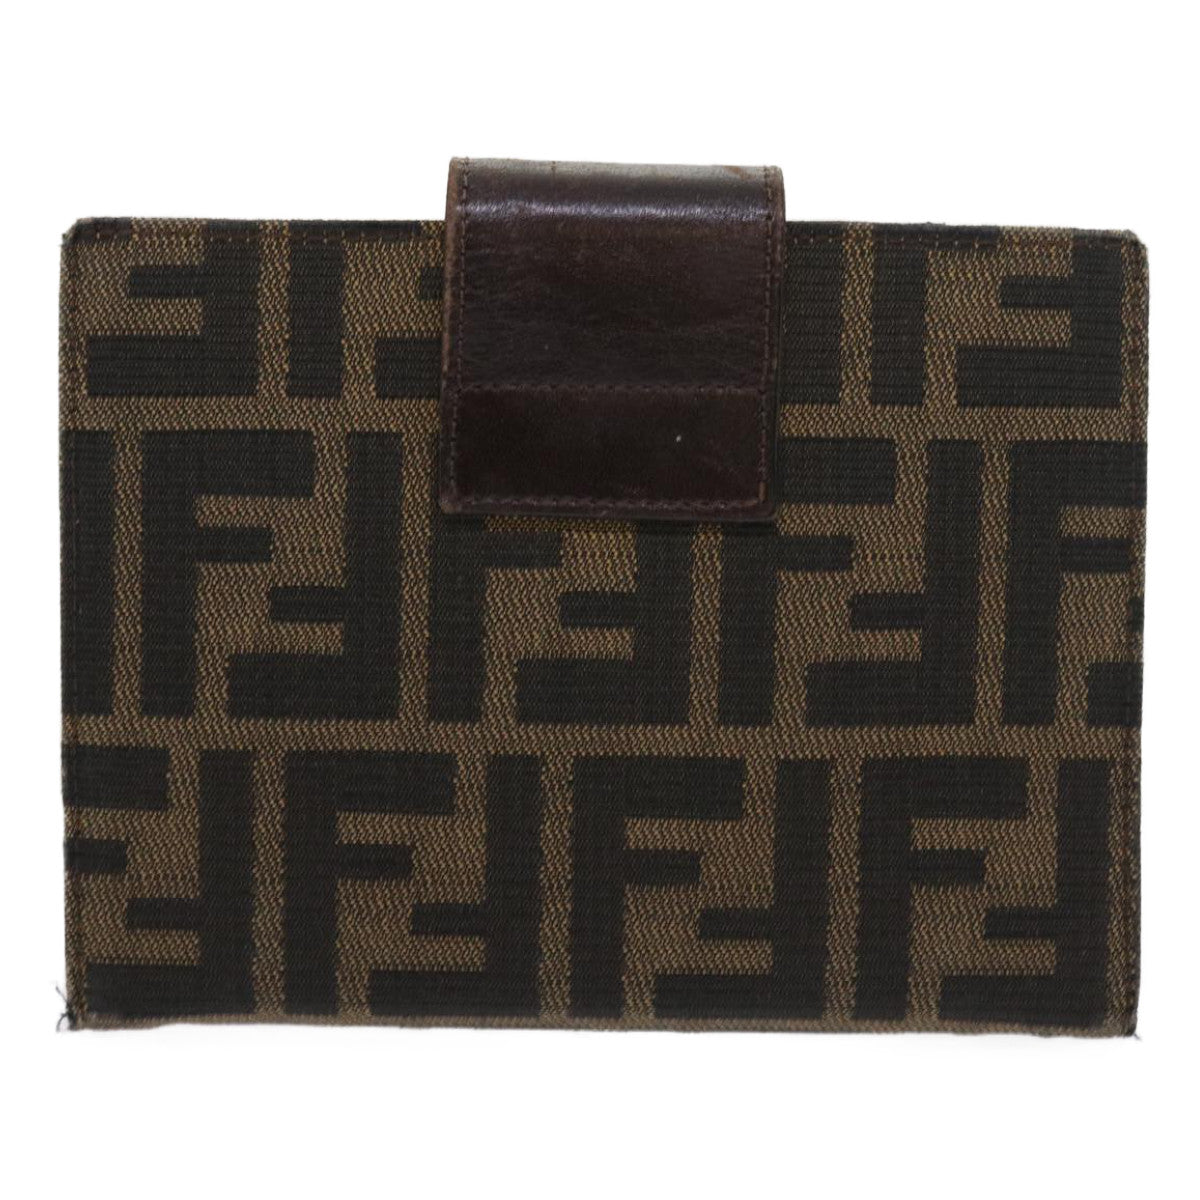 FENDI Zucca Canvas Day Planner Cover Black Brown 2289 31099 009 Auth 56779 - 0